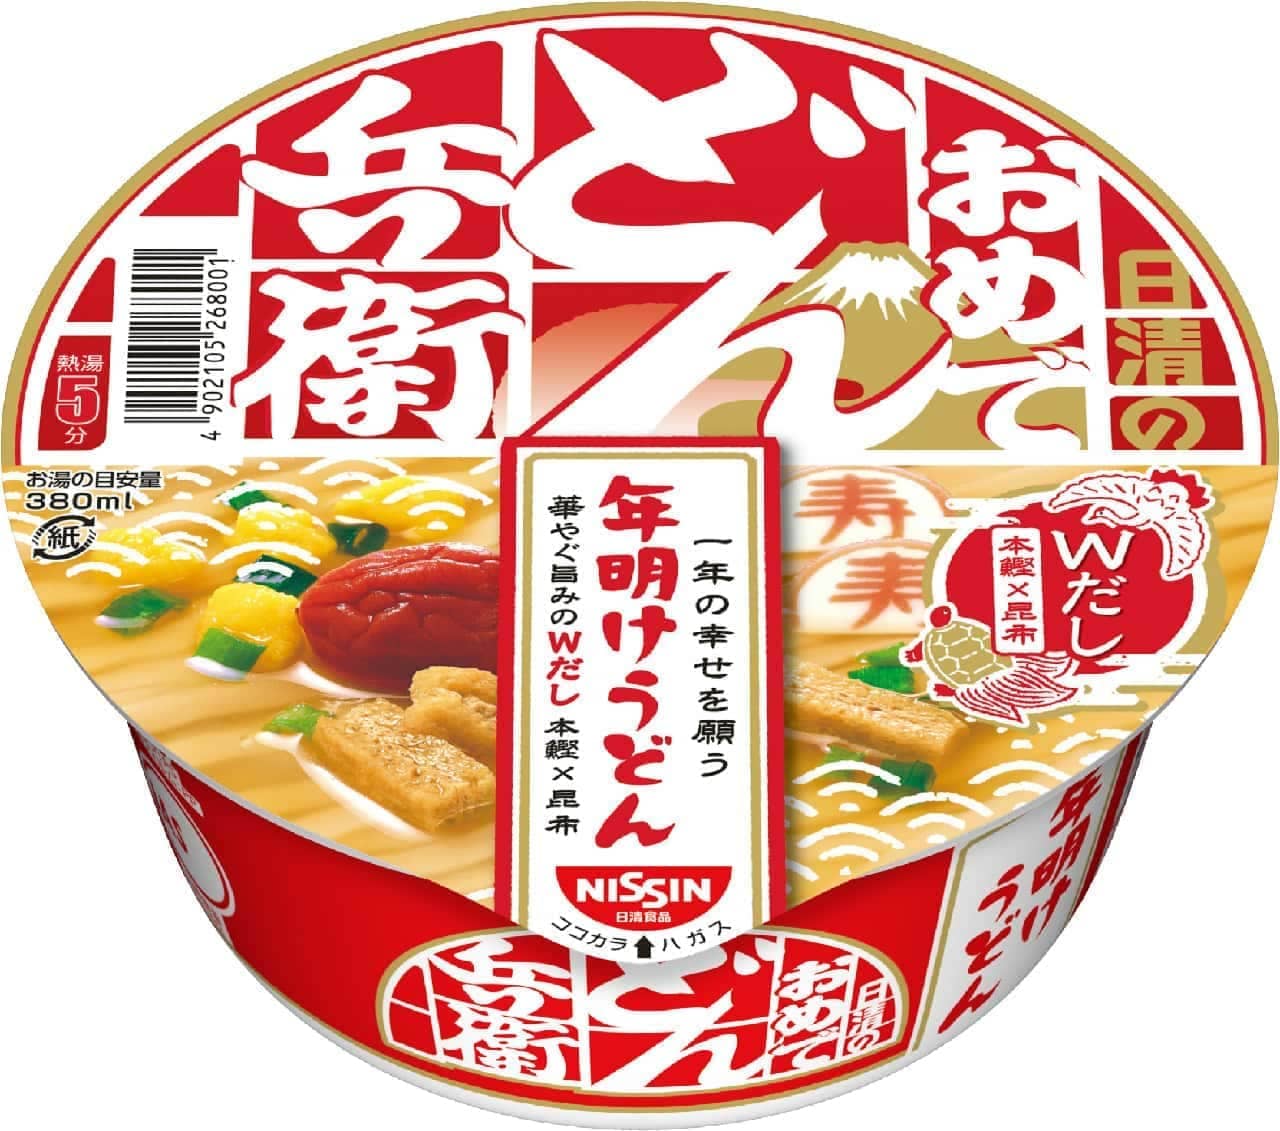 Nissin Foods "Nissin Congratulations Donbei New Year Udon"